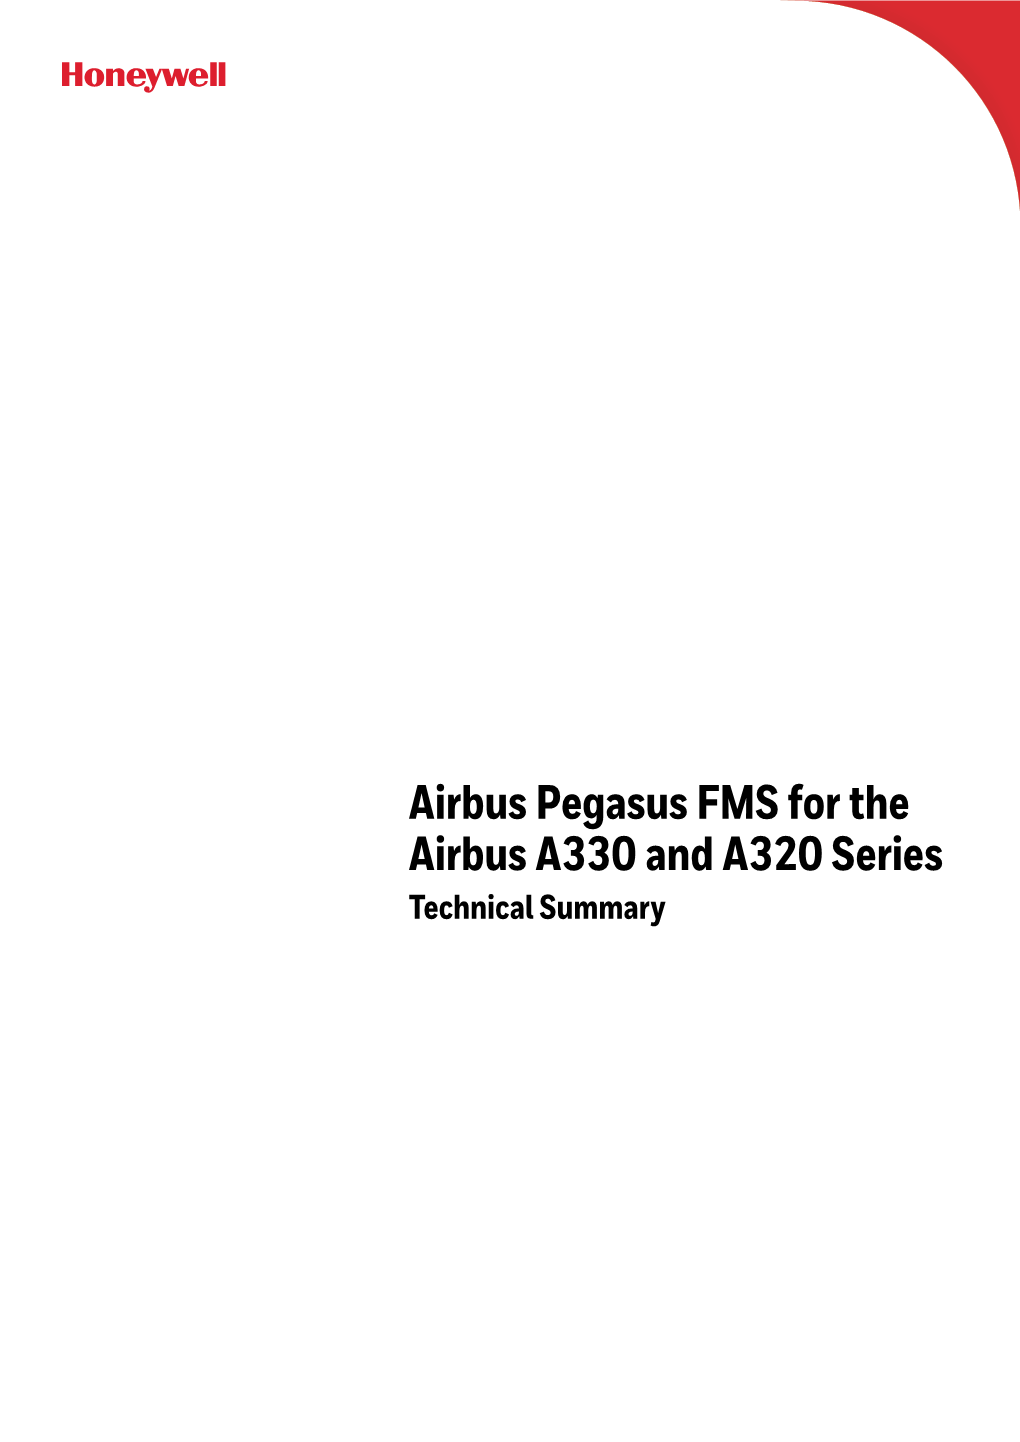 Pegasus FMS for Airbus A330 A320 Technical Summary